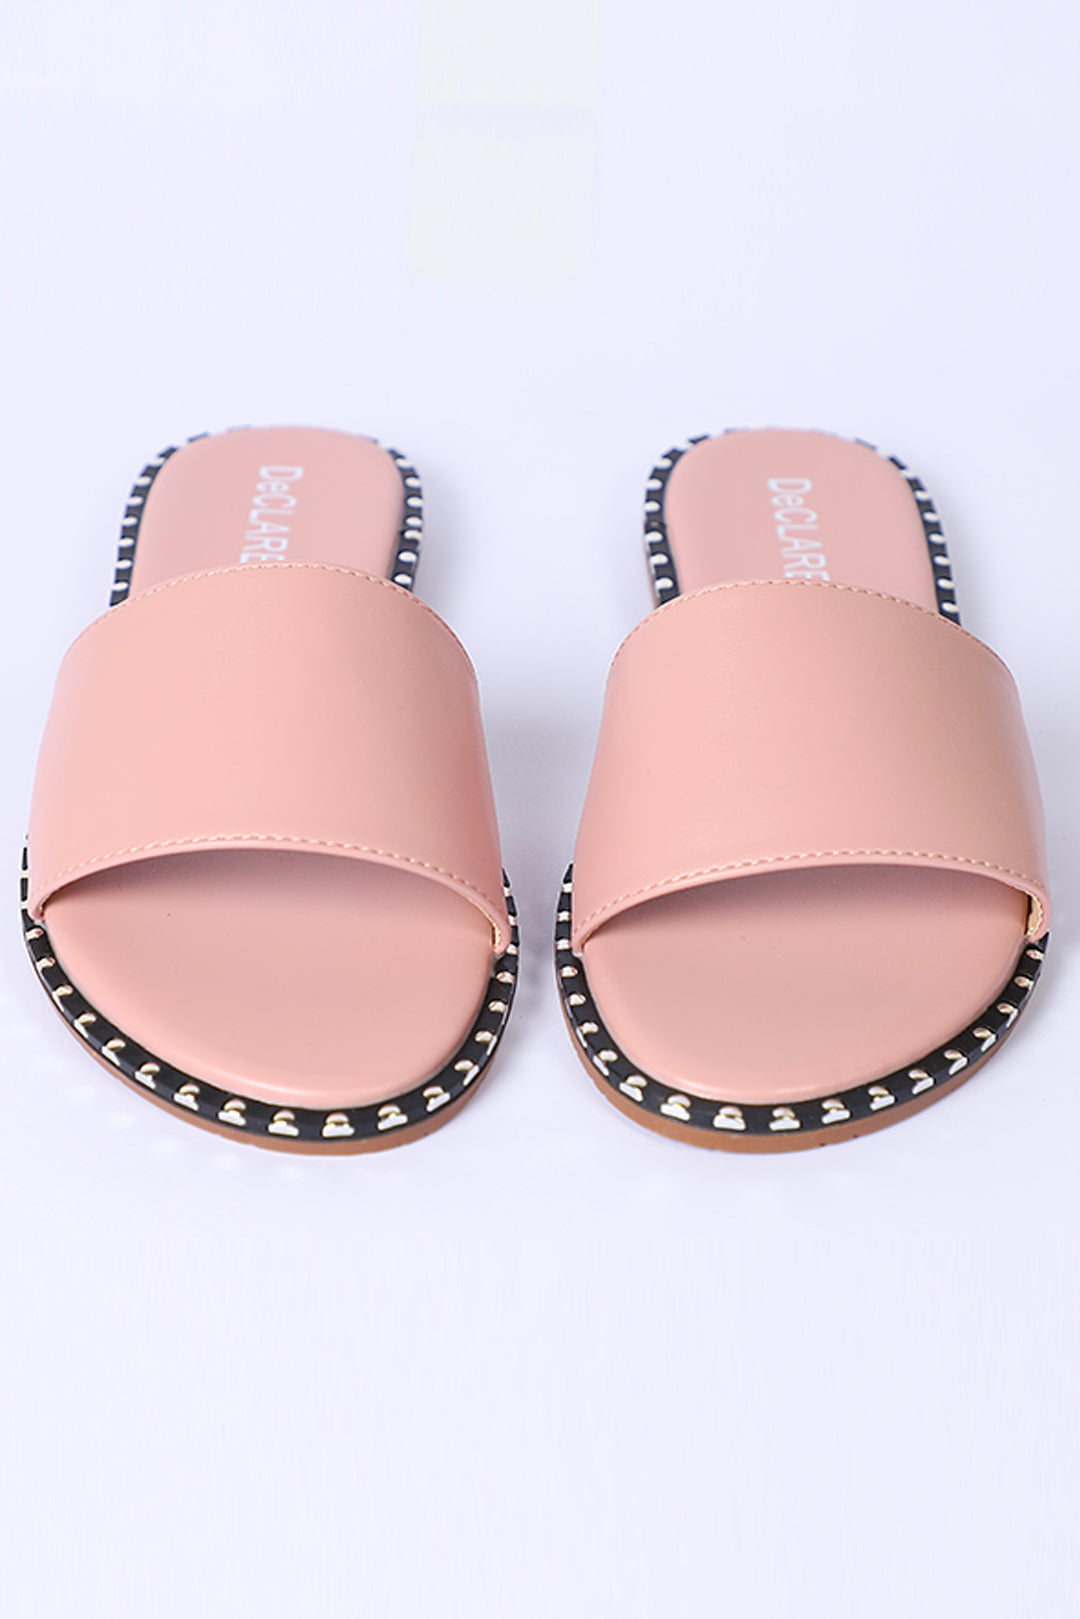 Shoes P2460 - Pink